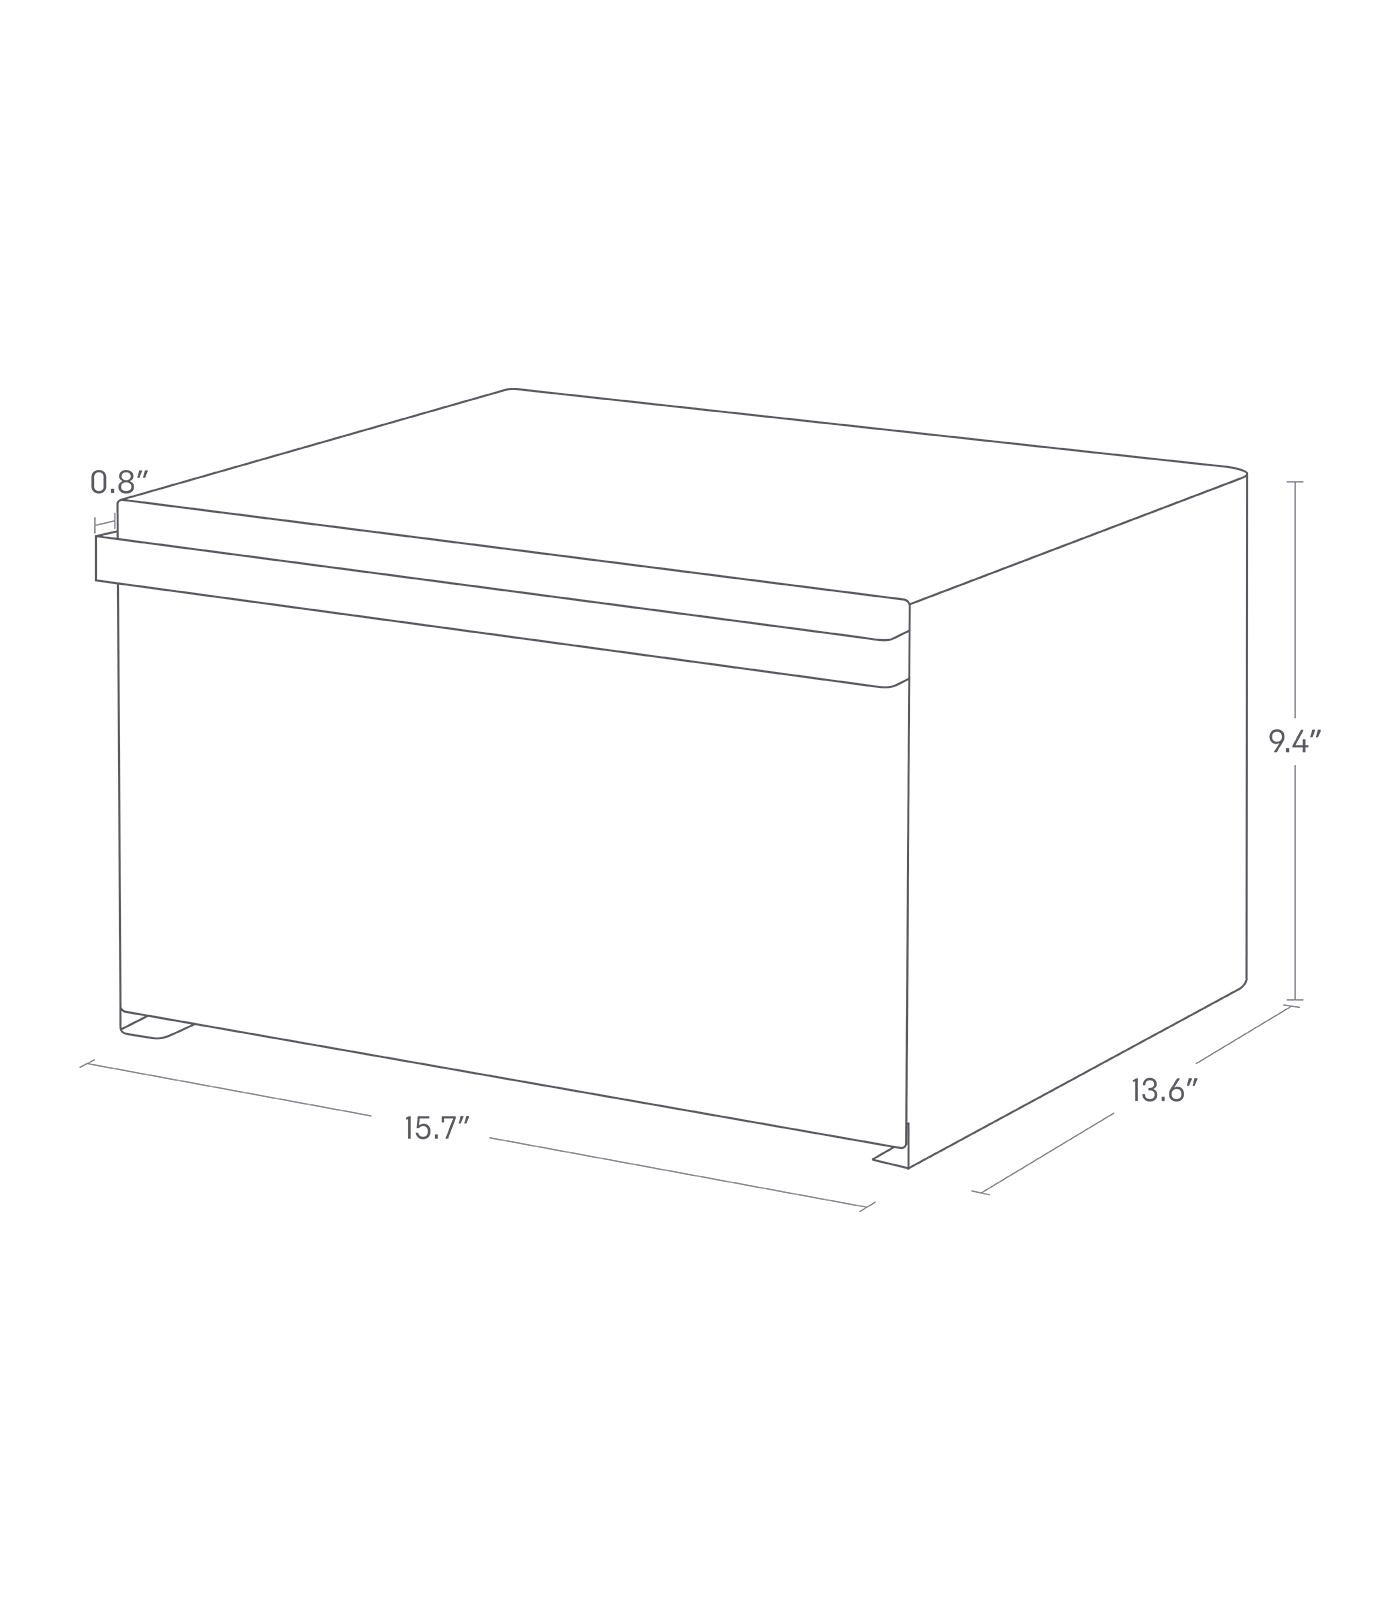 Dimension image for Bread Box - Two Styles on a white background including dimensions  L 13.58 x W 15.75 x H 9.45 inches